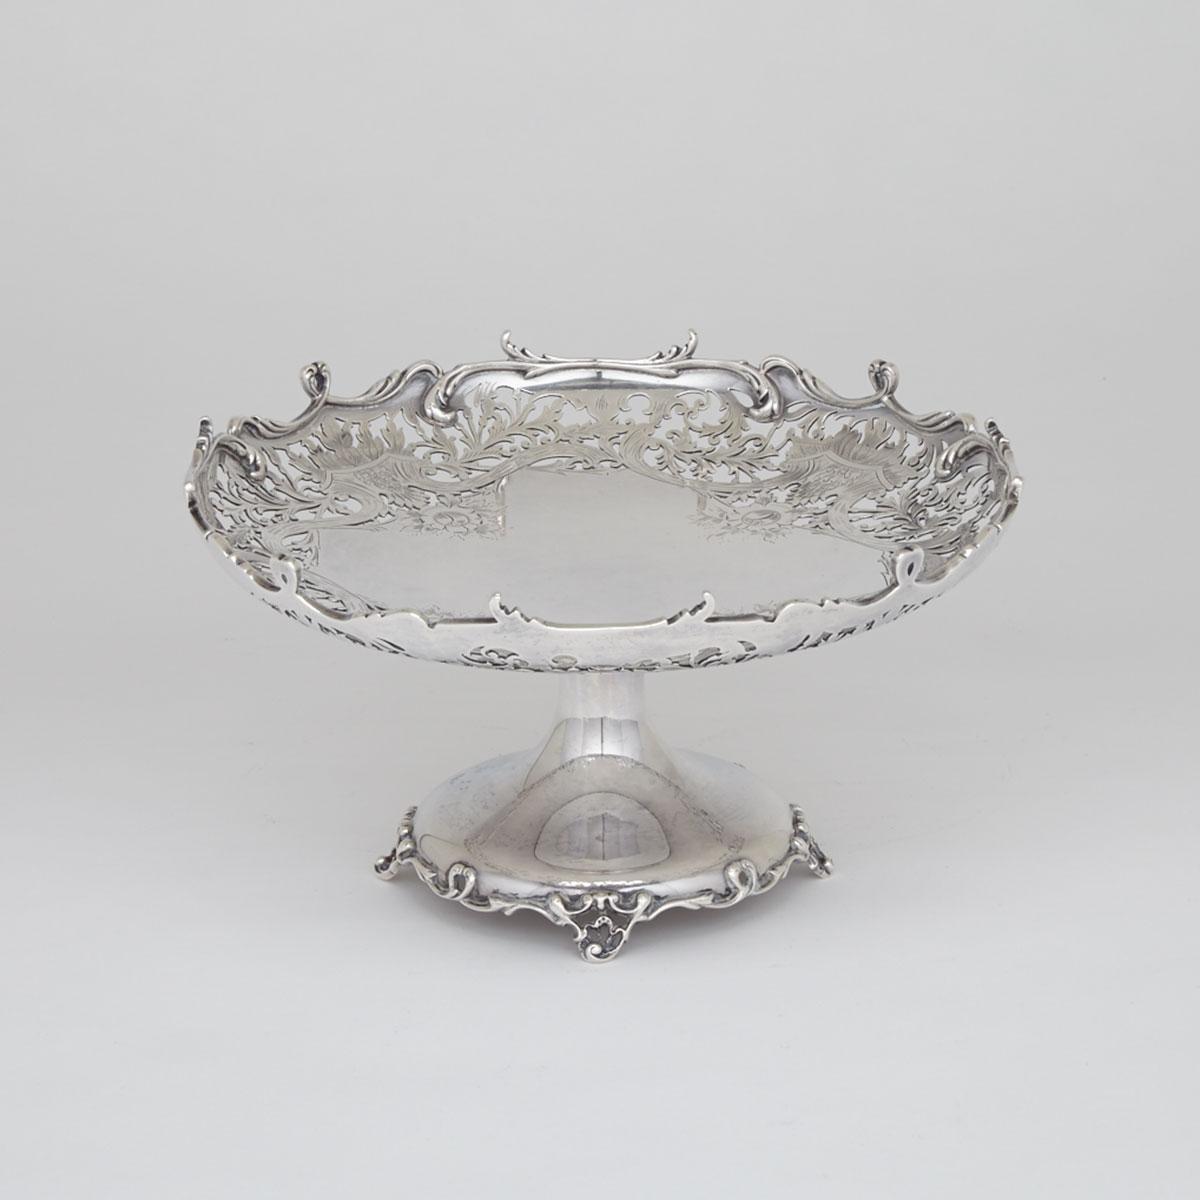 Canadian Silver Footed Comport, Henry Birks & Sons, Montreal, Que., c.1904-24